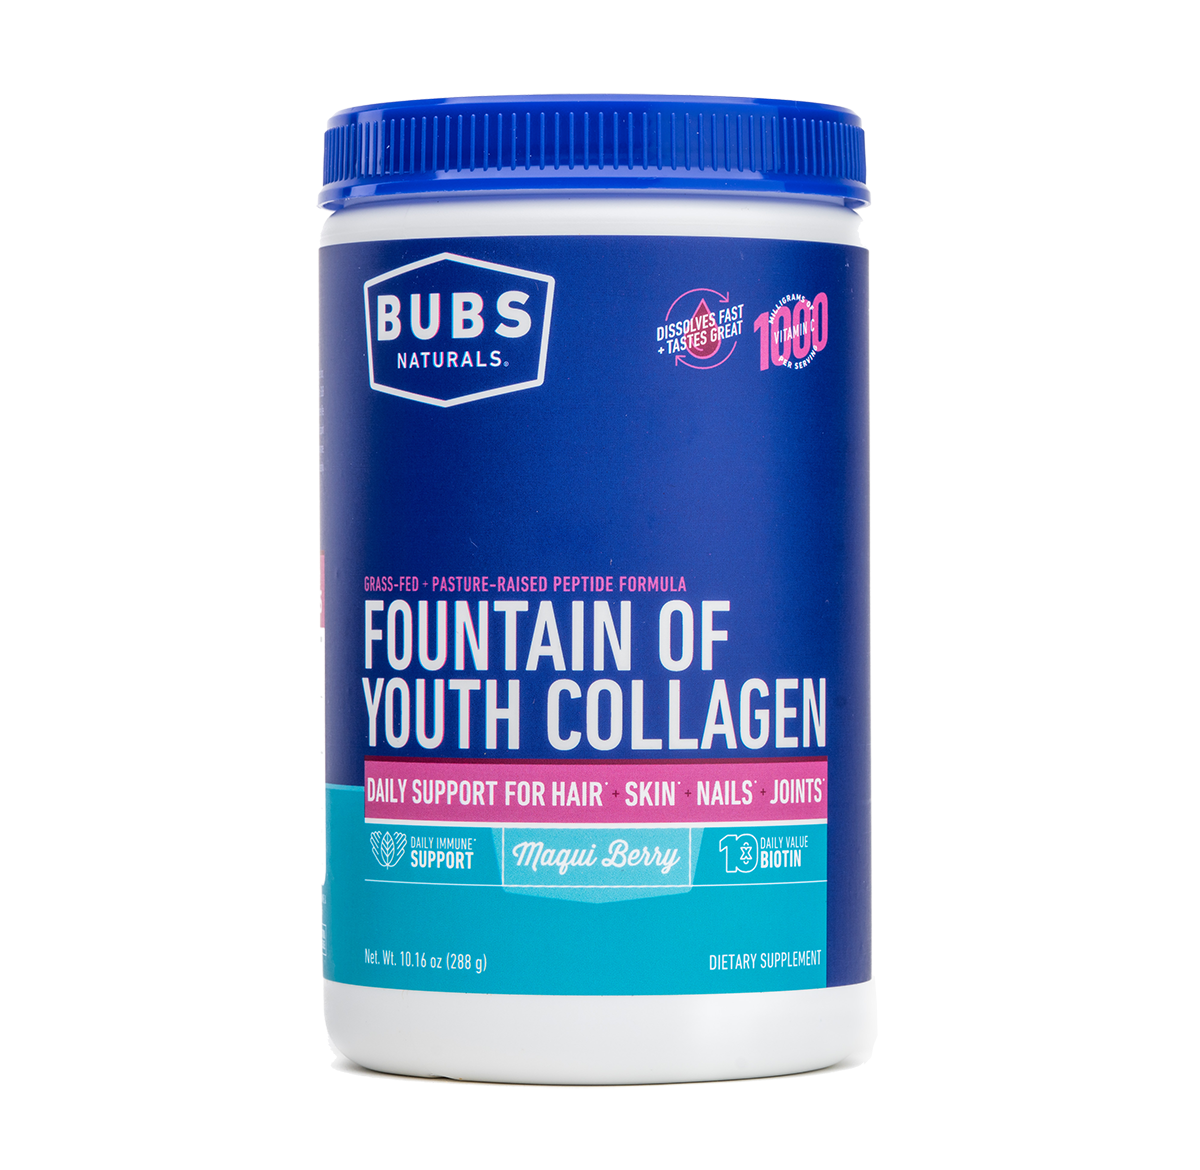 Fountain of Youth Maqui Berry Flavored Collagen with Biotin and Vitamin C, 10.16 oz Tub, BUBS Naturals, Front